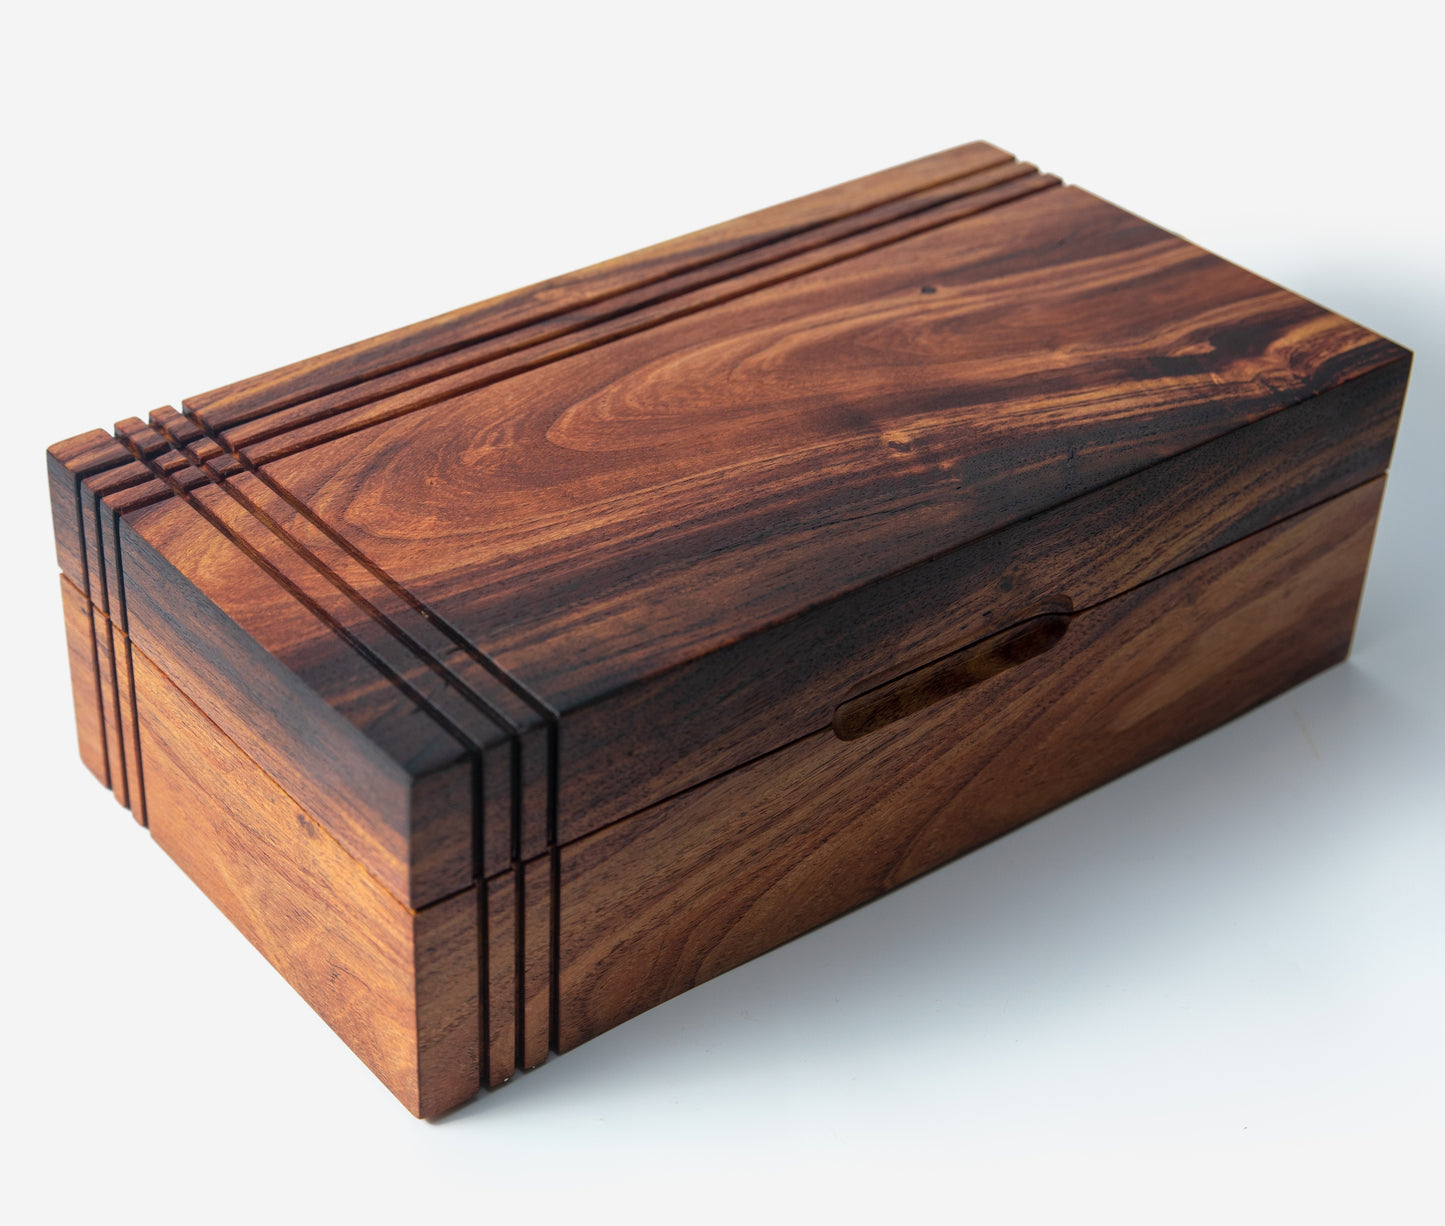 Rustic Mesquite Tea Chest - Handcrafted with 8 compartments and Hinged Lid with Brass Hinges